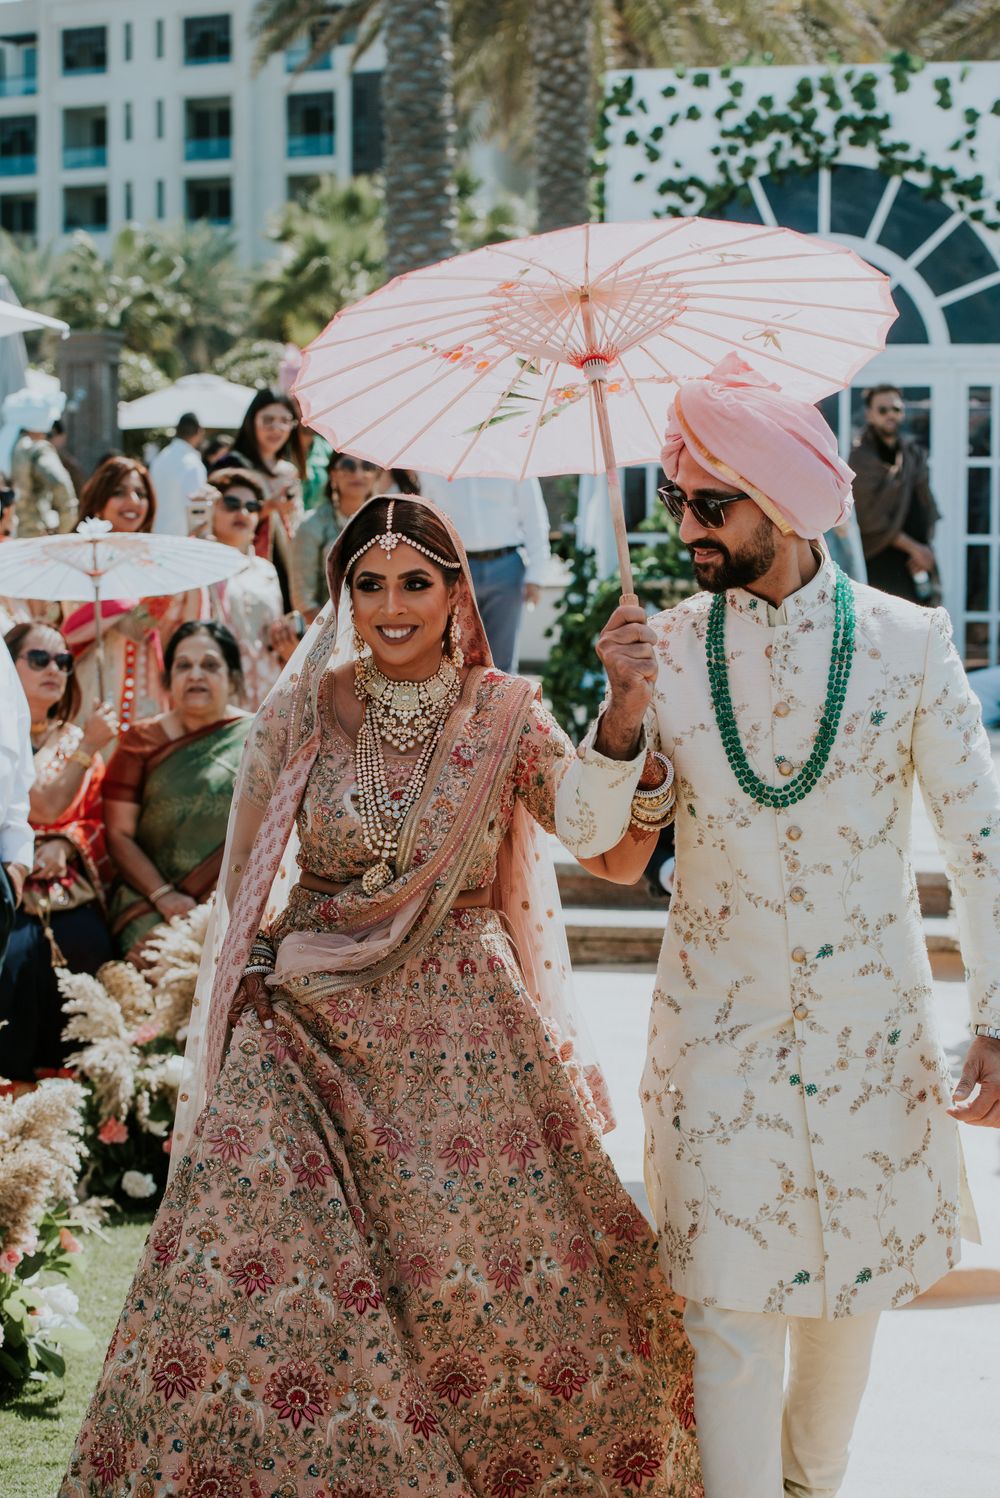 Photo of bridal entry with her brother under an umbrella